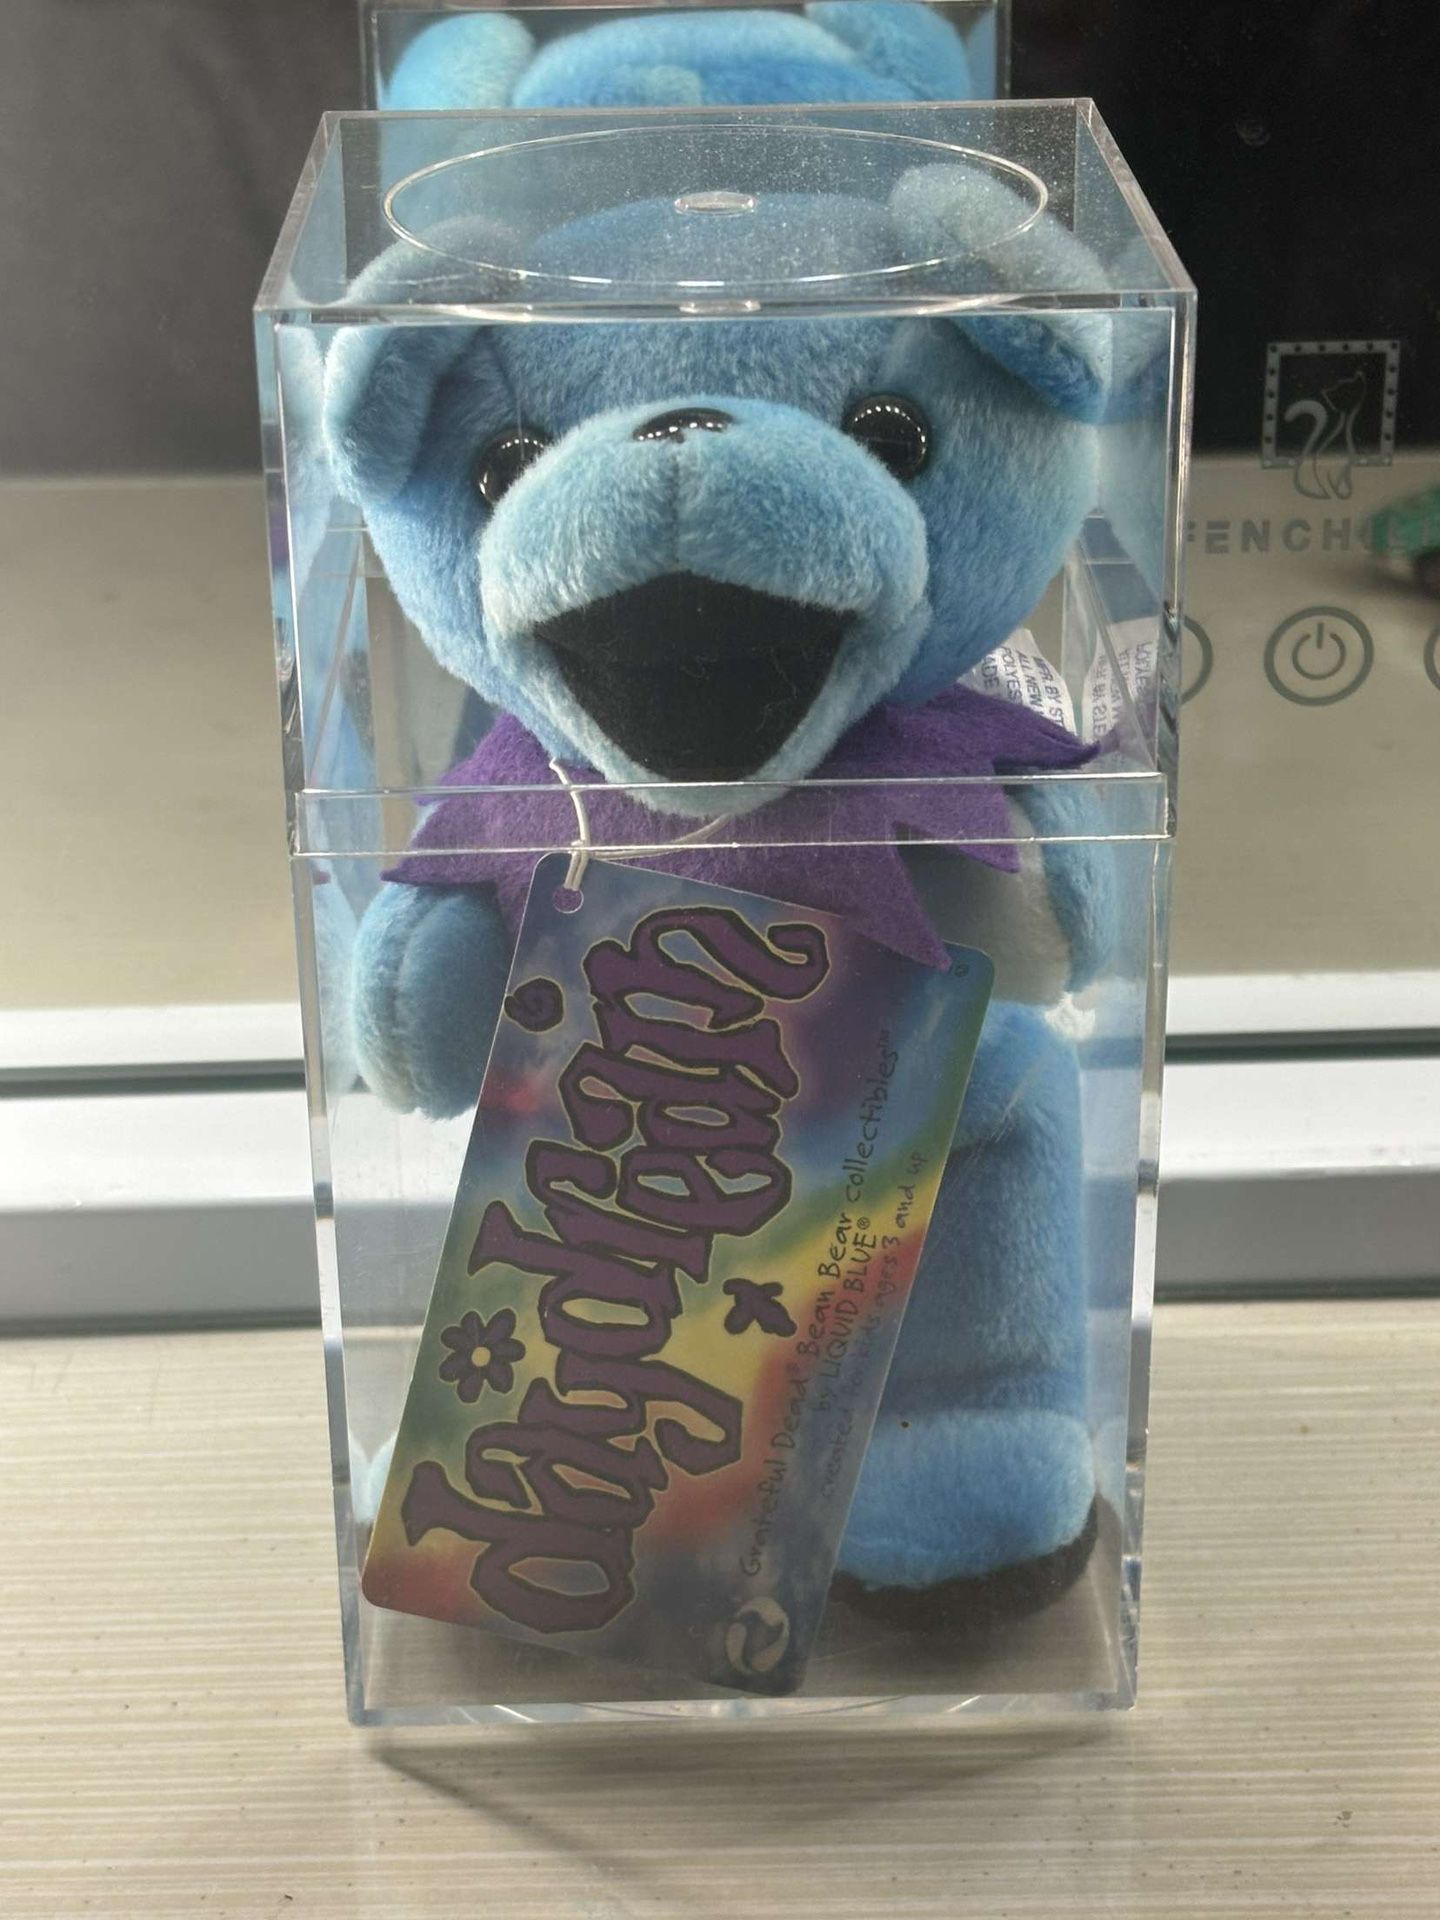 GRATEFUL DEAD " DAYDREAM " BEANIE BABY 7" TALL MADE  LIQUID BLUE (NEW) WITH CASE